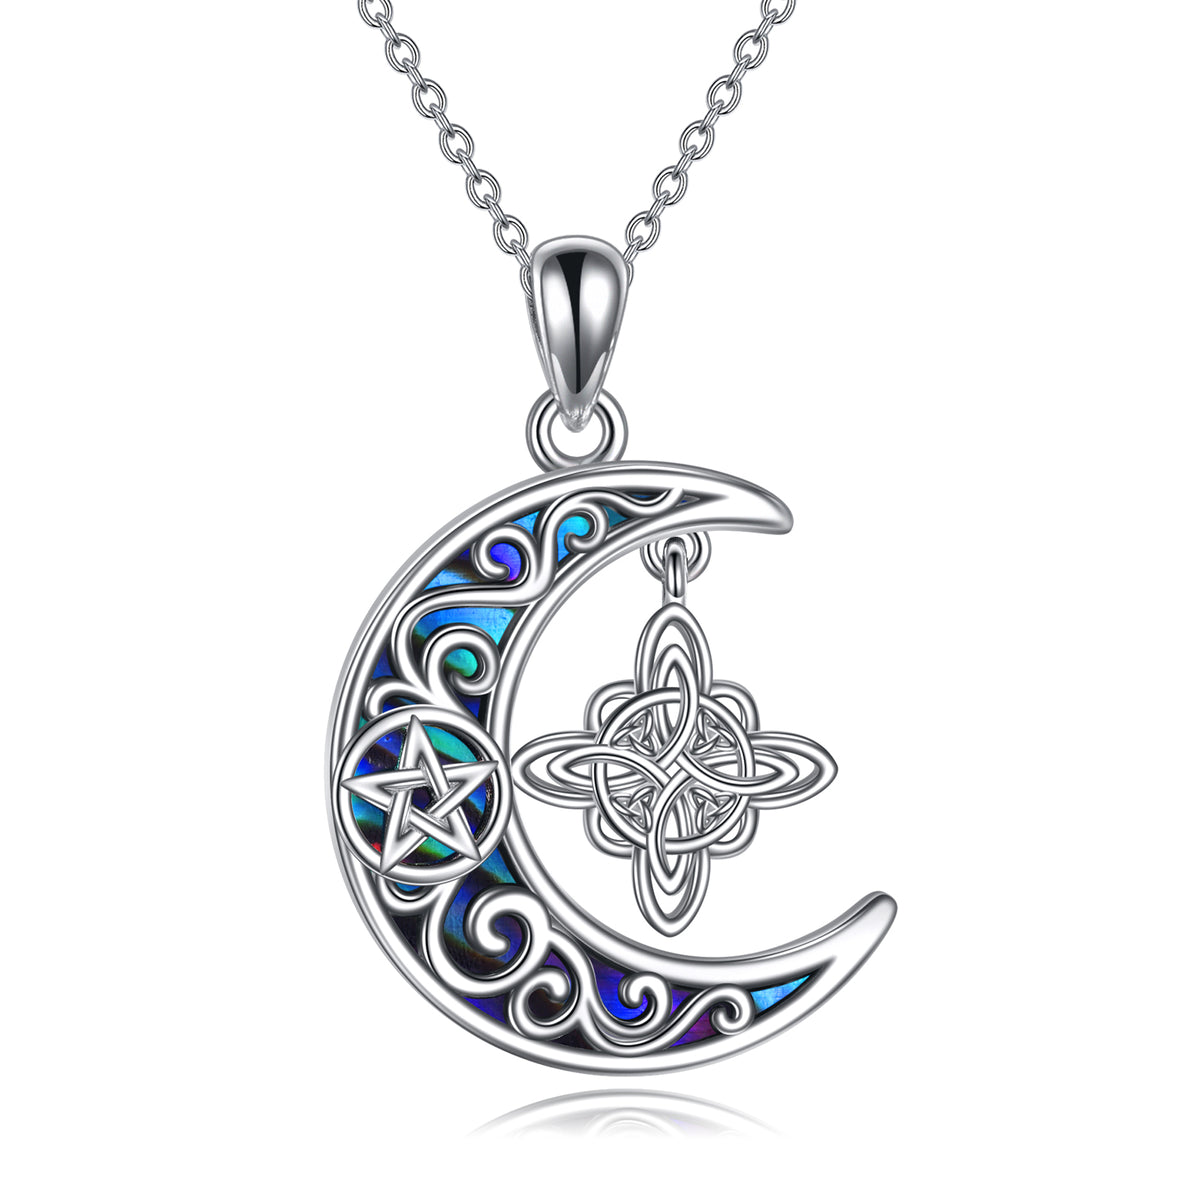 Wiccan Wonder: Witch's Knot Pendant Necklace